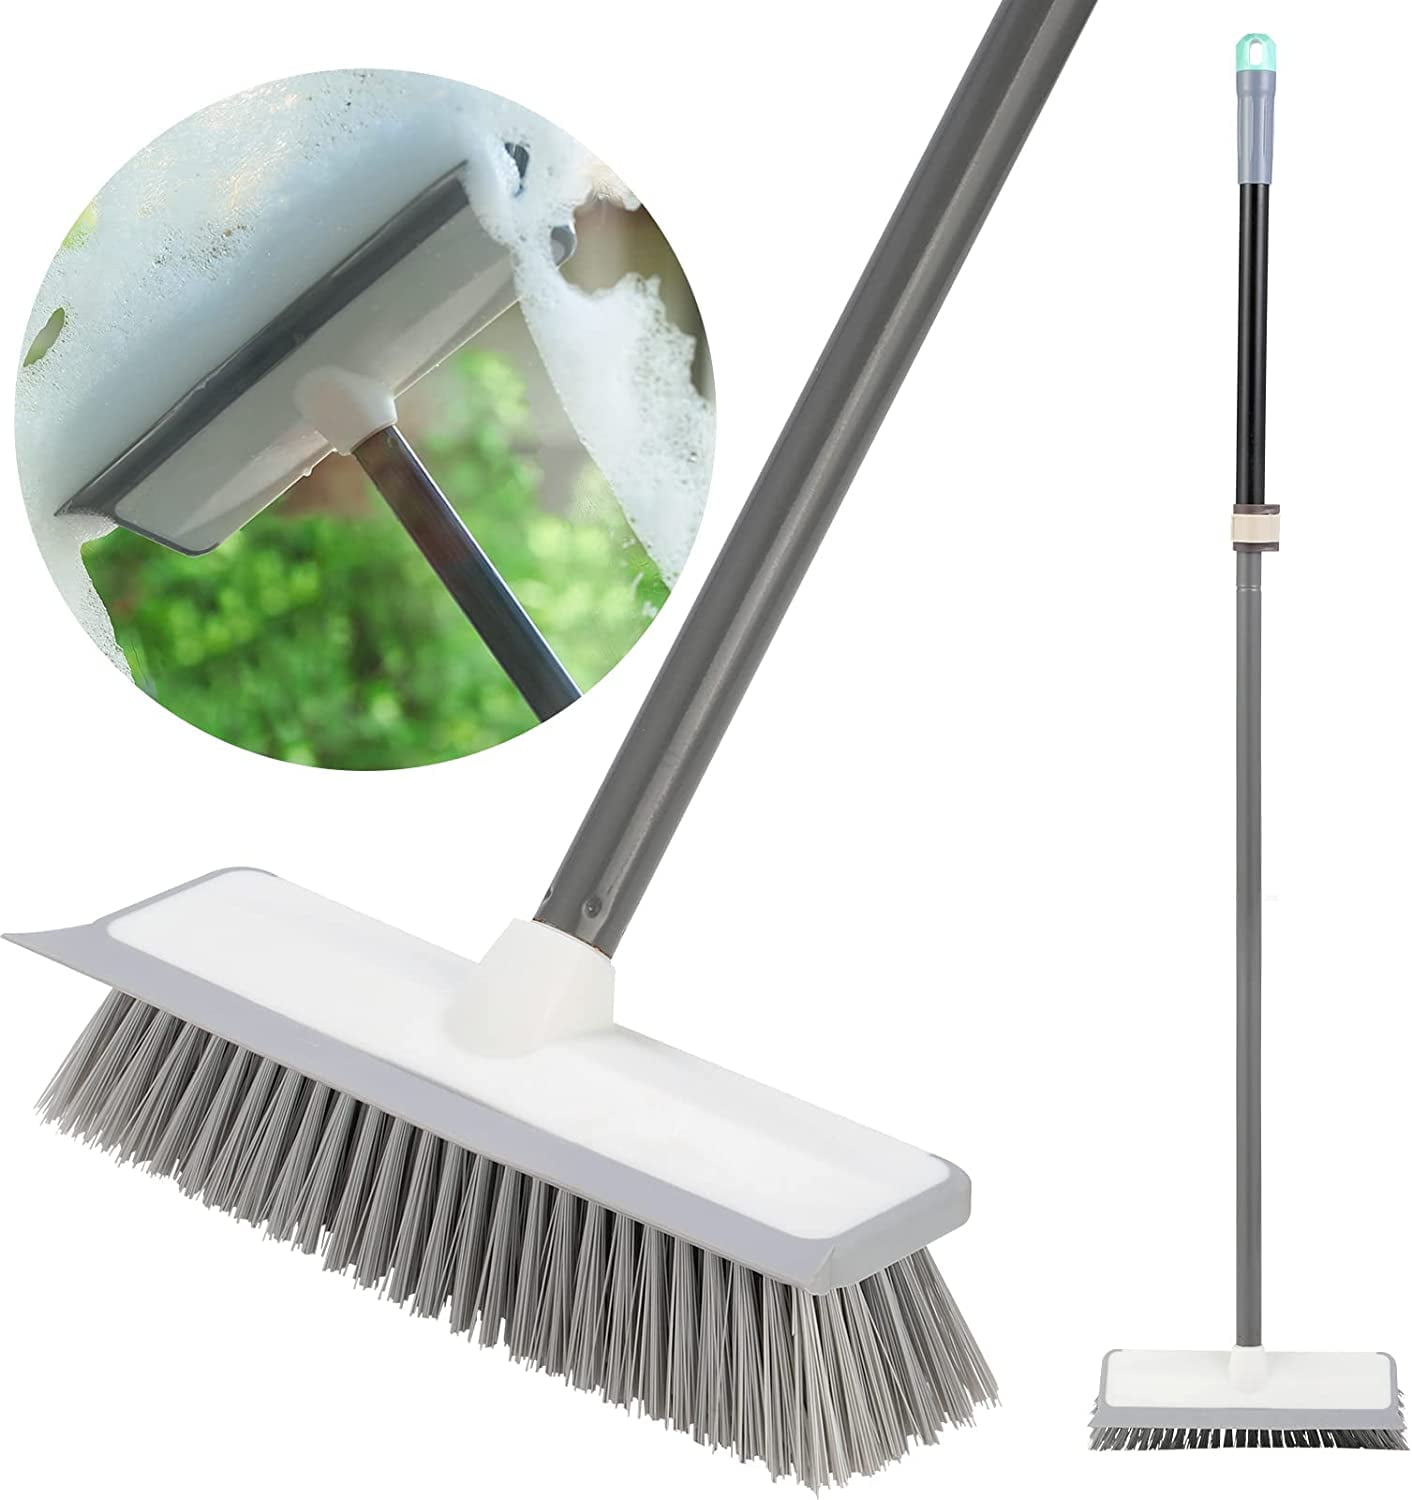 Stainless Steel Wire Floor Brush Head, Multi-Purpose Steel Metallic Wire  Deck Brush, Heavy Duty Brushes for Scrubbing Stains on Concrete, Cleaning